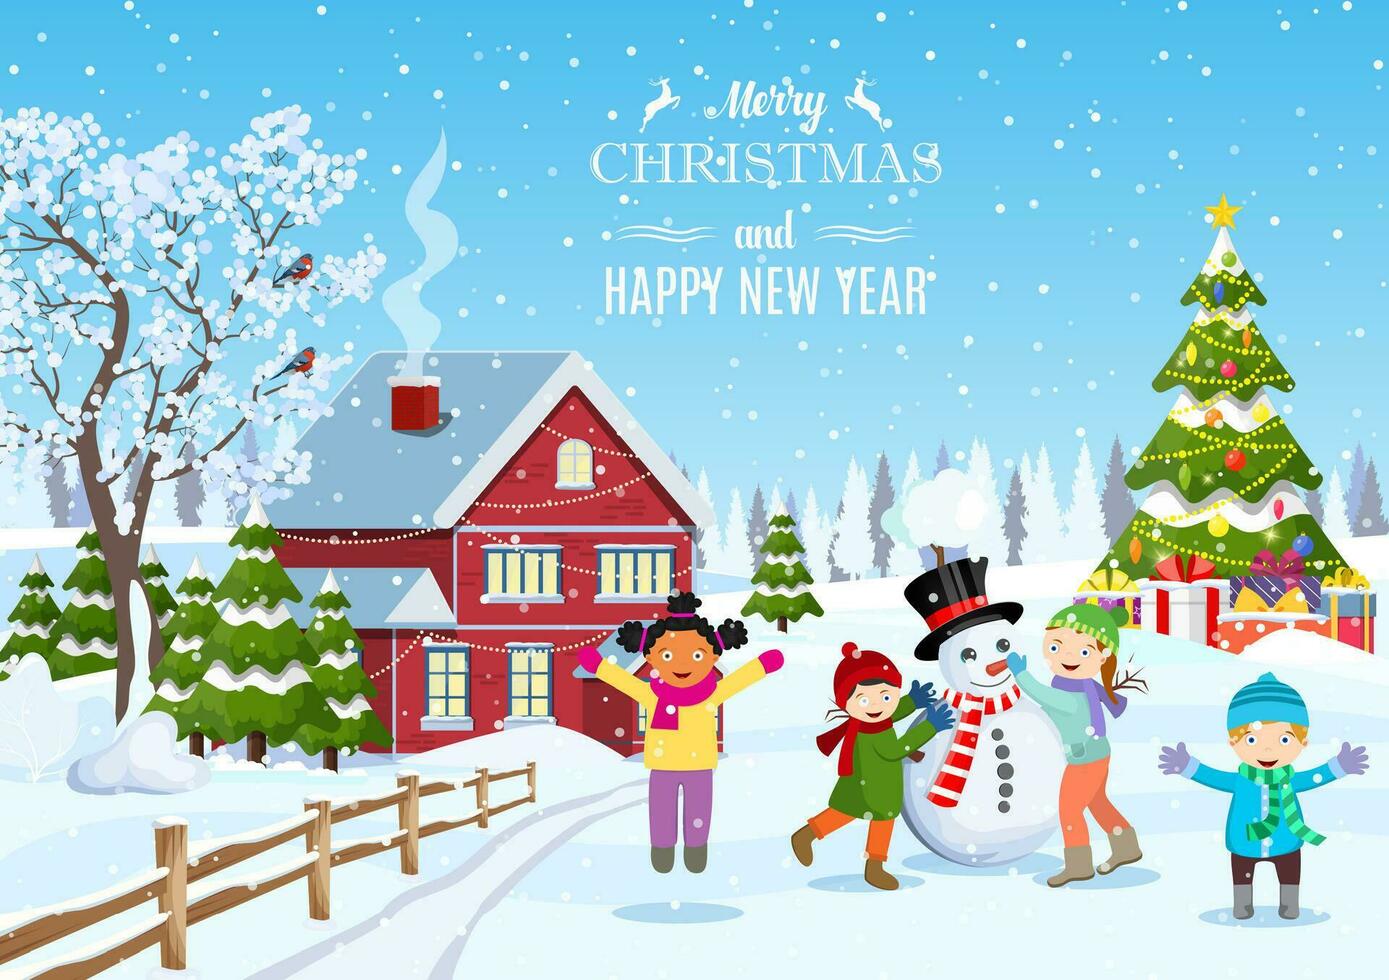 Suburban house covered snow. Building in holiday ornament. Christmas landscape tree spruce, snowman. Happy new year decoration. Merry christmas holiday. Children building snowman. Vector illustration